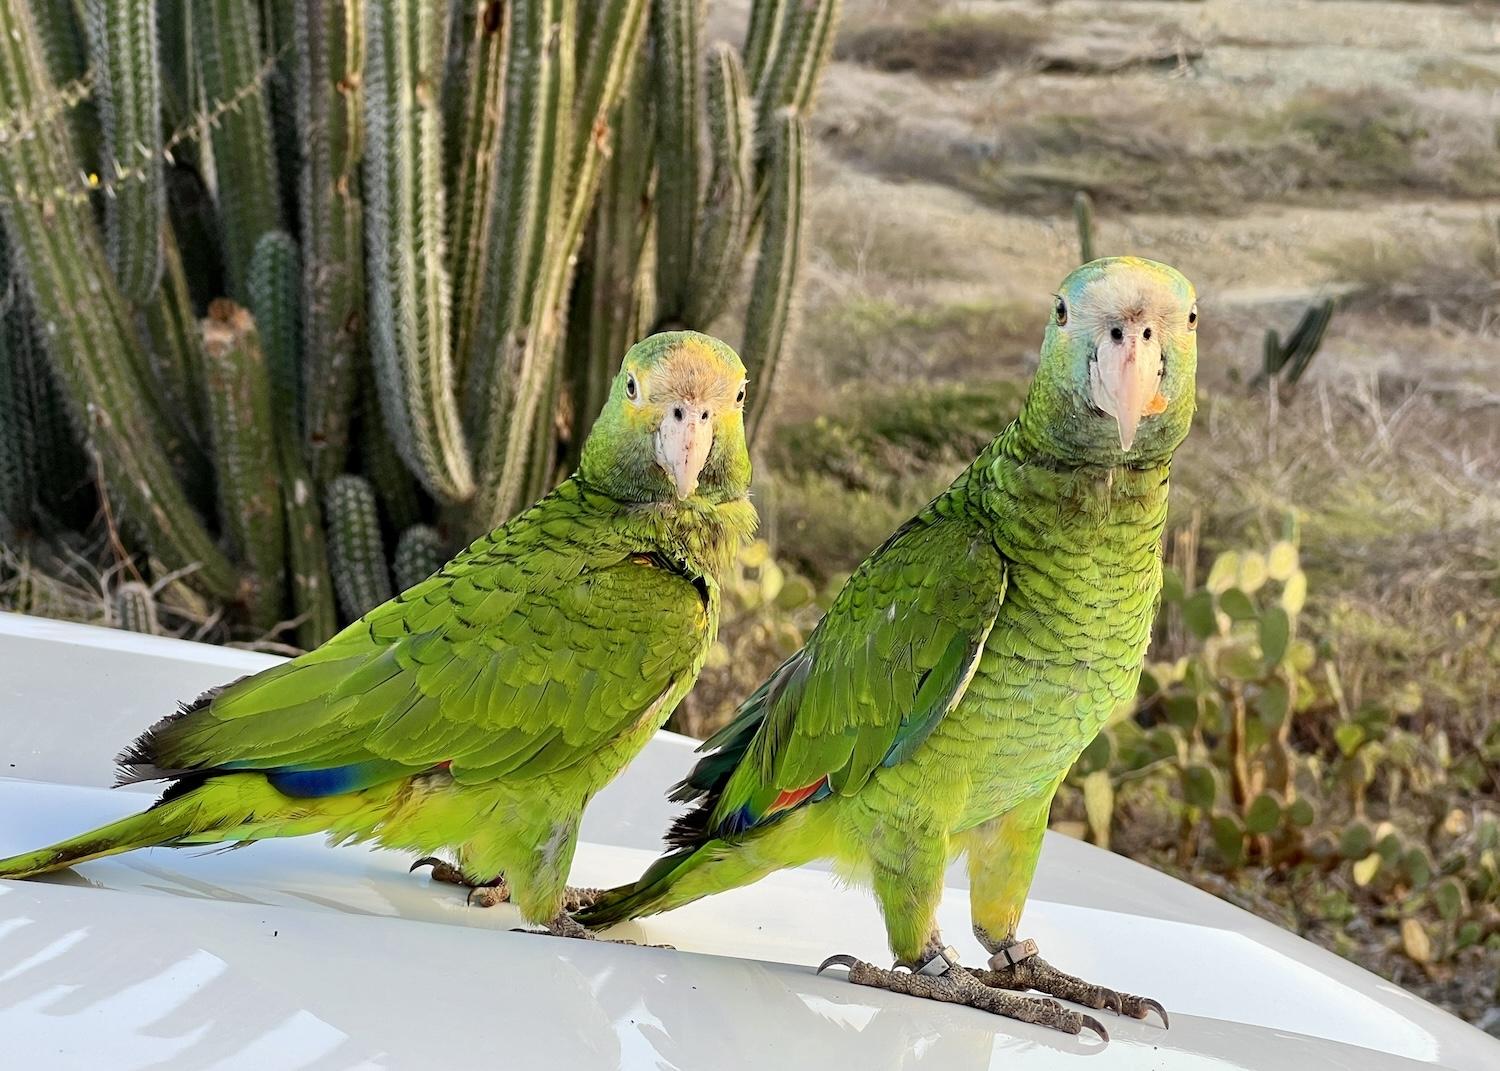 Two Yellow-shouldered amazons (Lora) land on a Arikok National Park truck in Aruba.